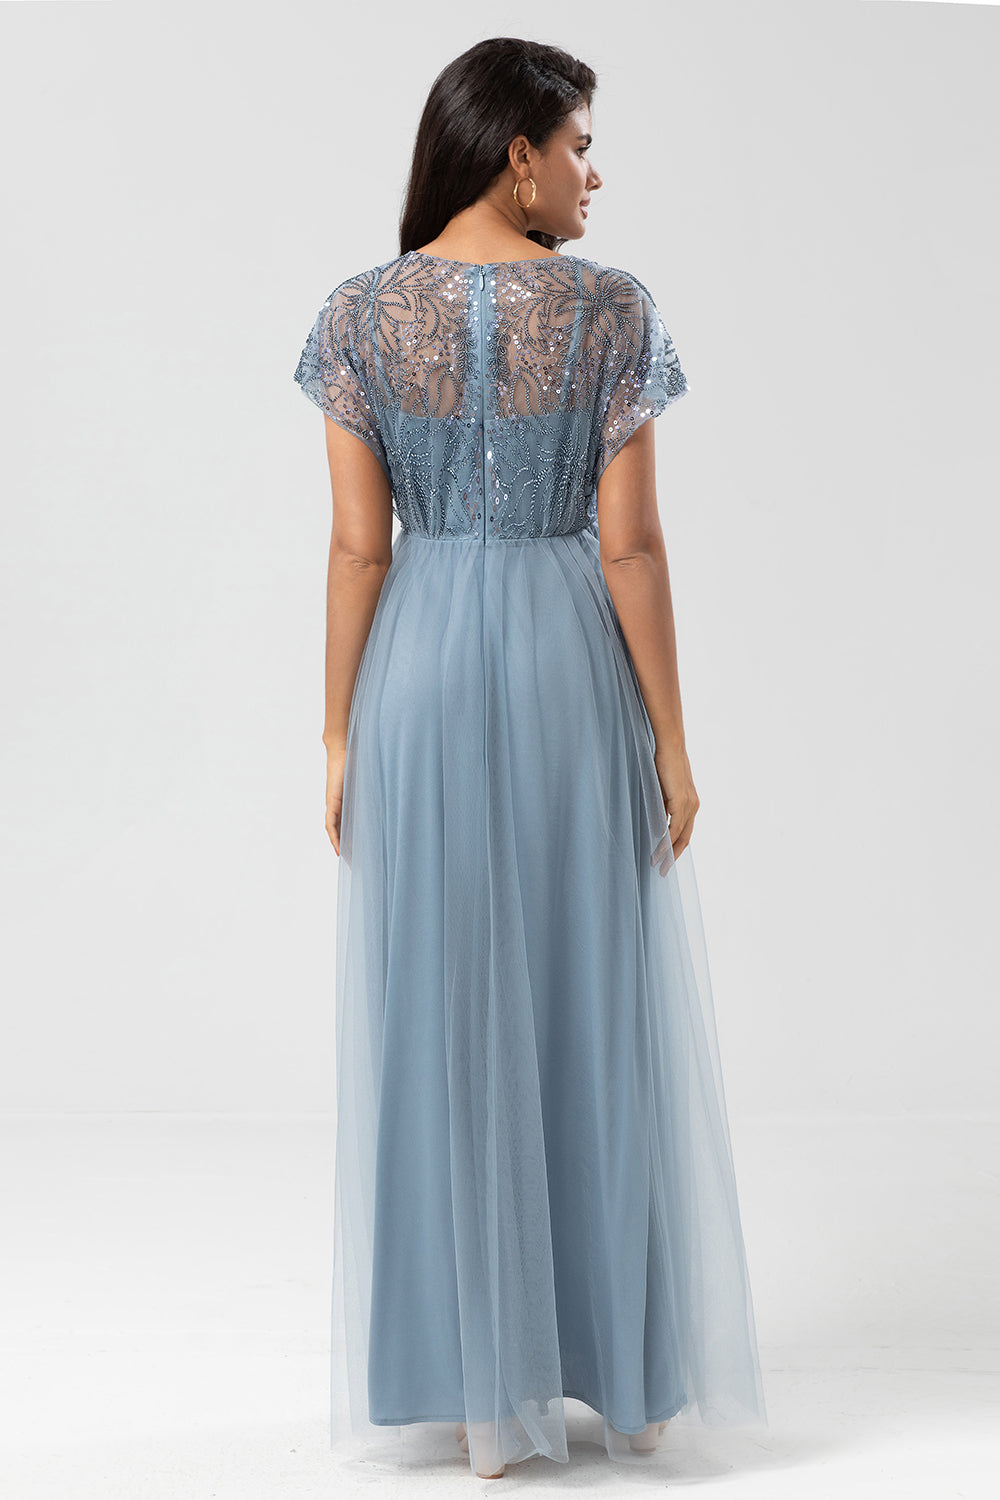 Bringing the Charm A-Line Sage Maternity Bridesmaids Dresses with Sequins